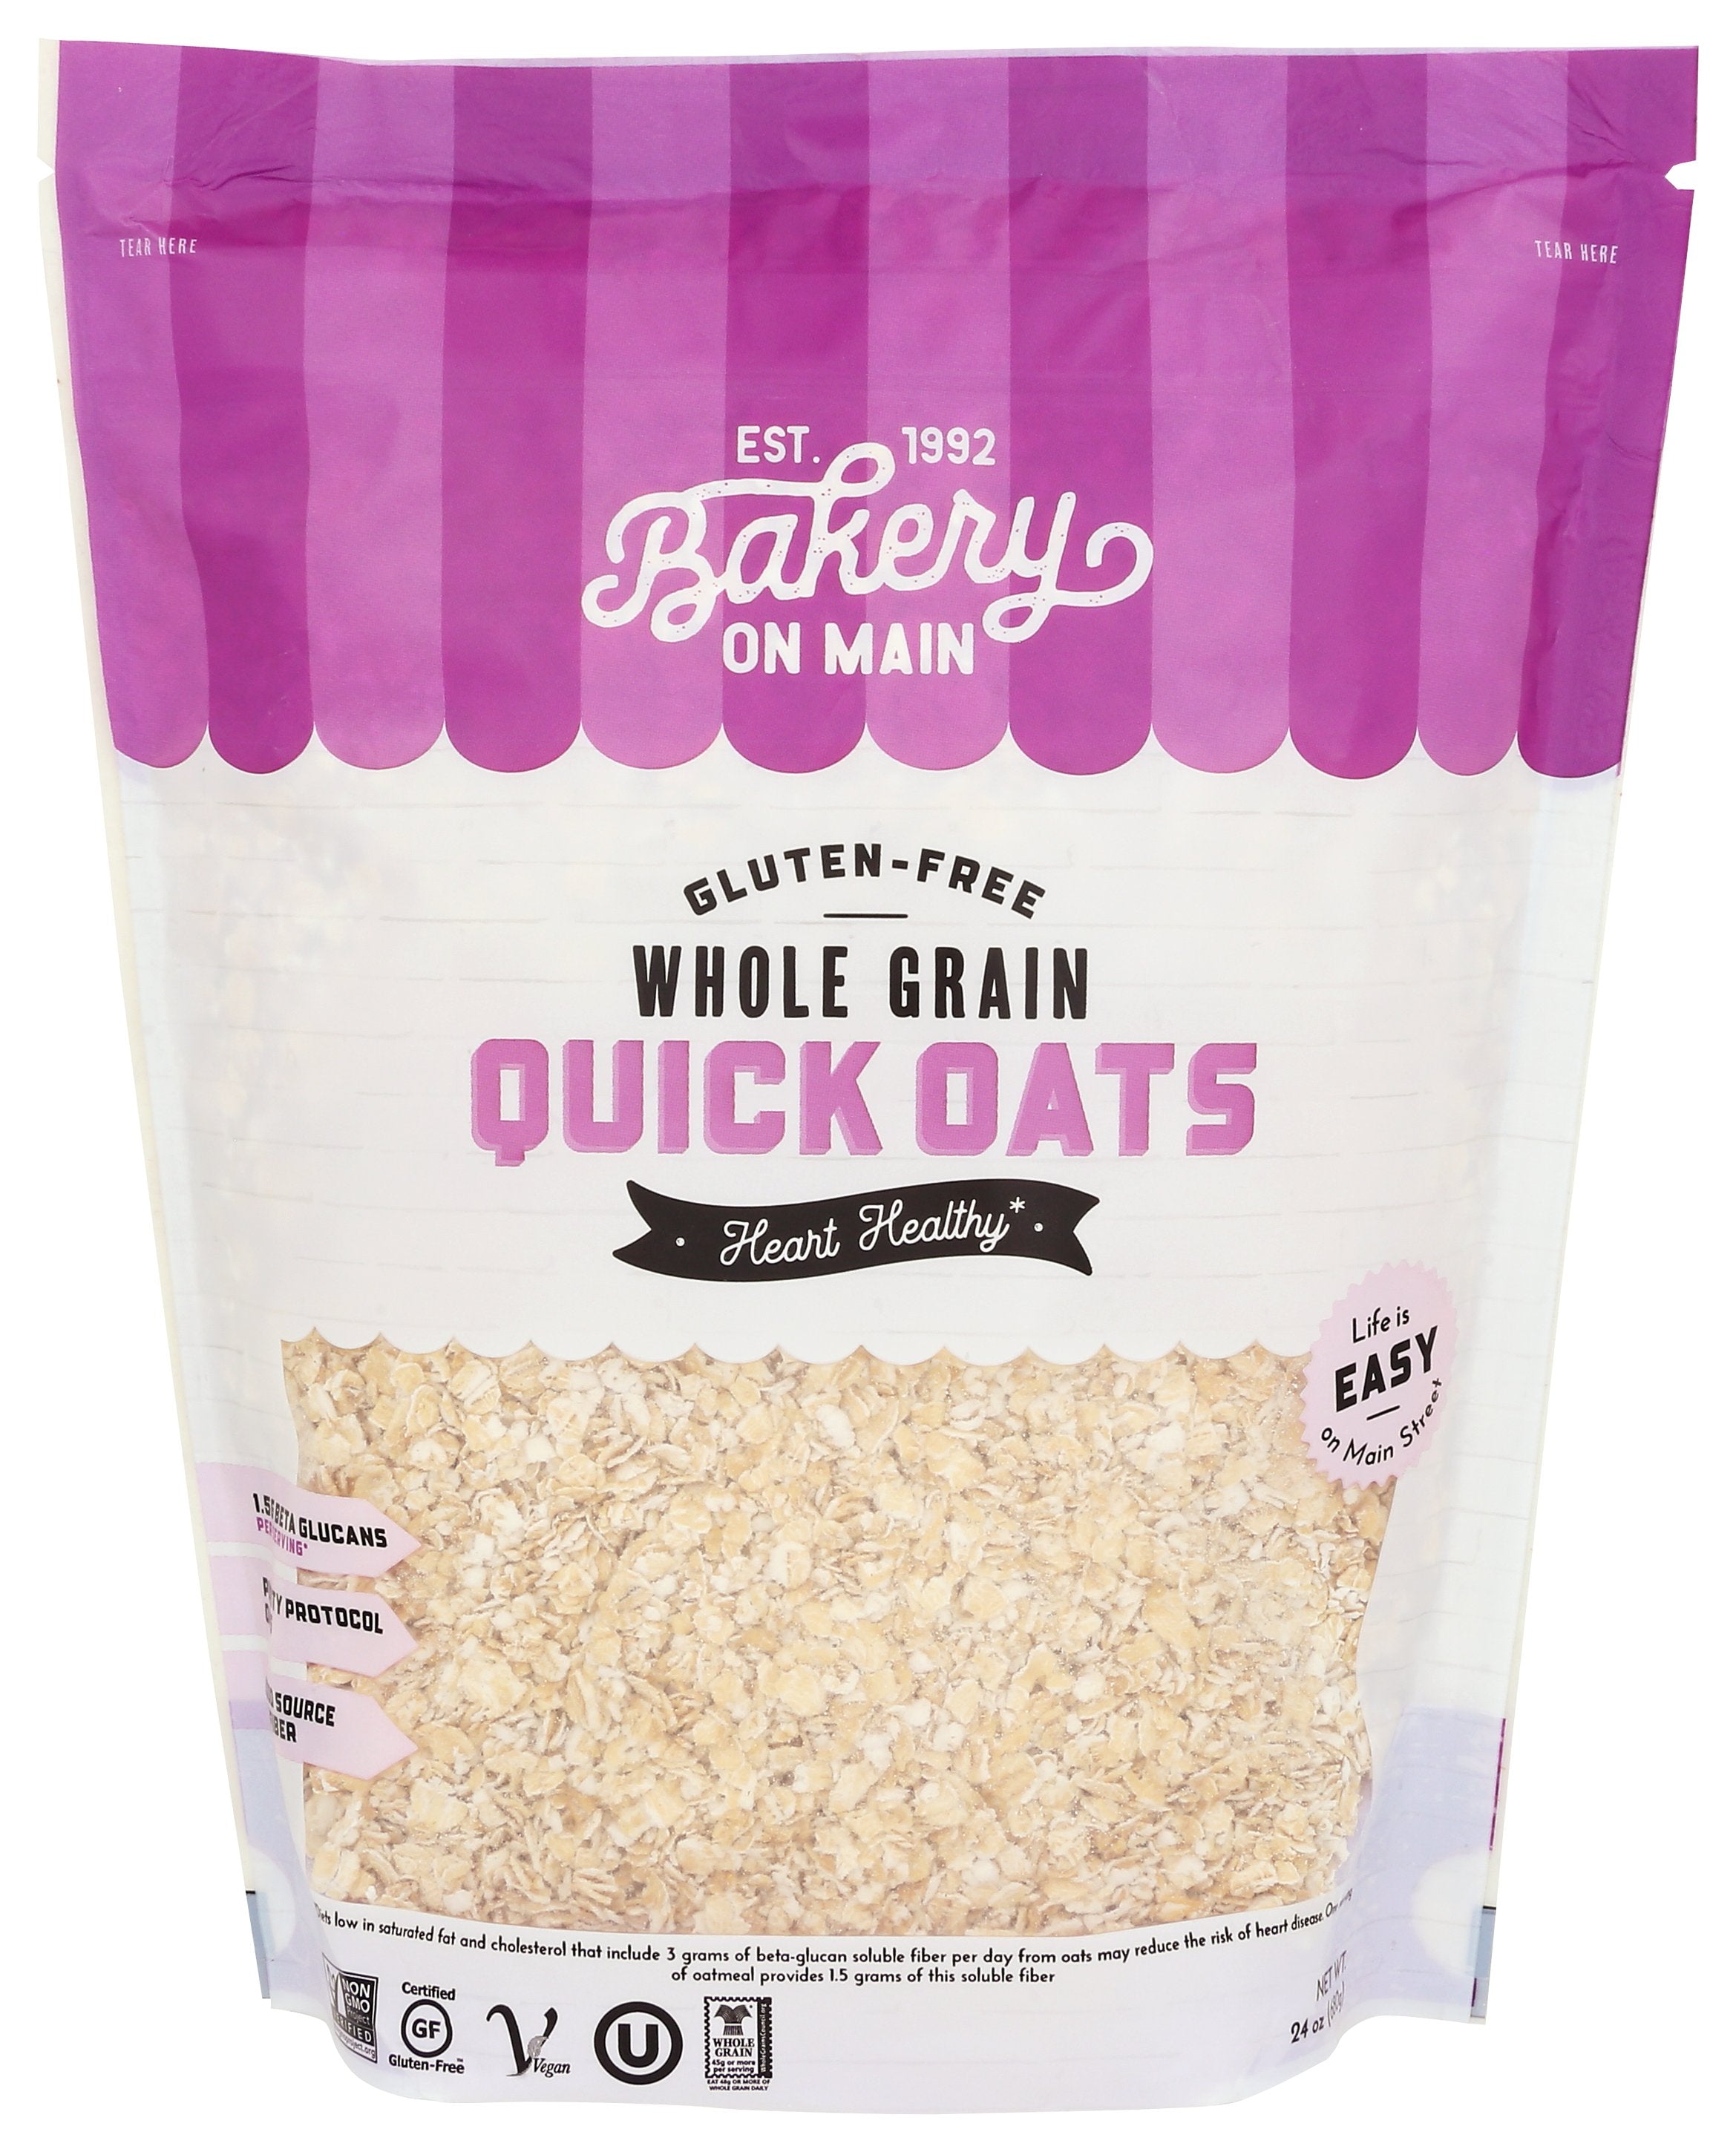 BAKERY ON MAIN CEREAL QUICK OATS - Case of 4